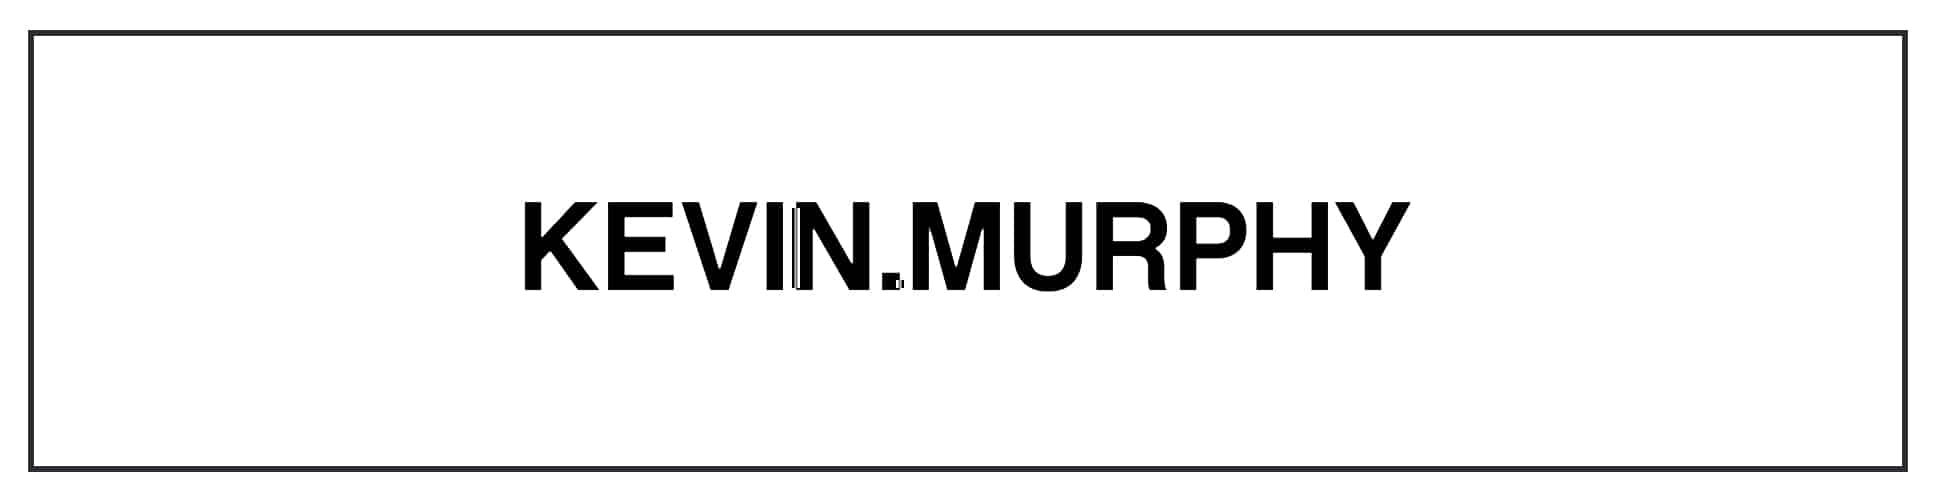 The logo for kevin murphy.